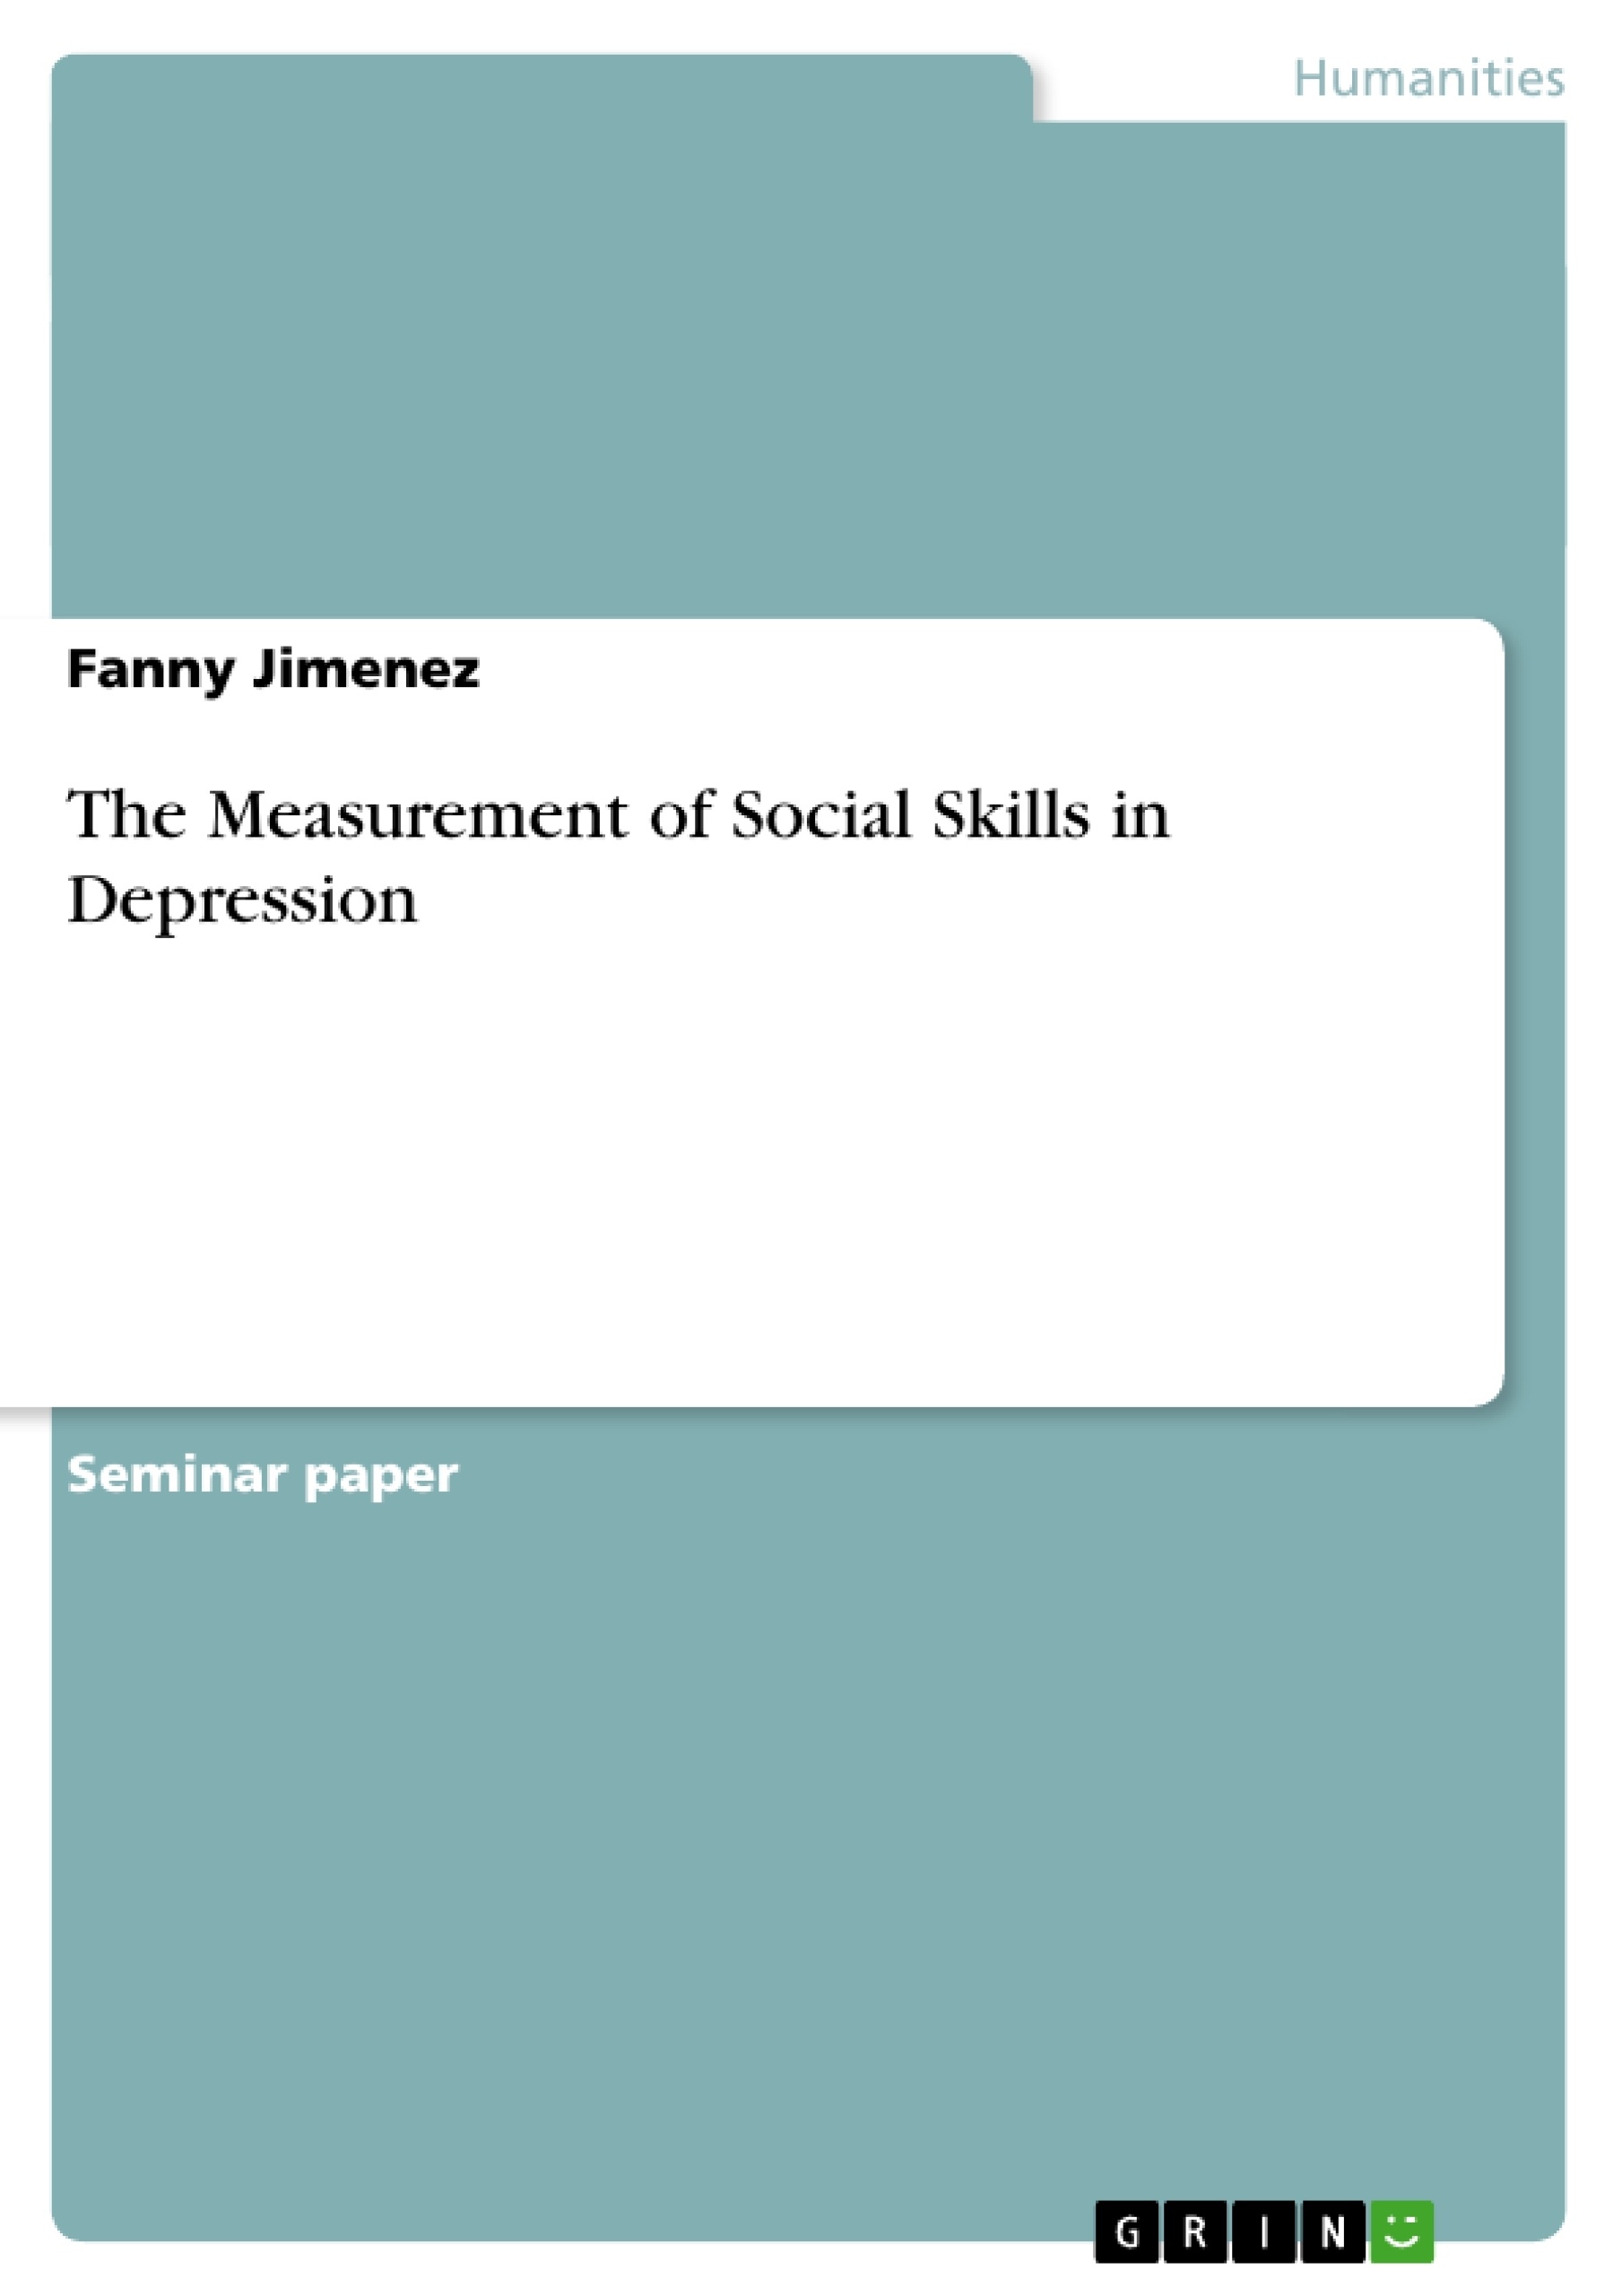 Title: The Measurement of Social Skills in Depression